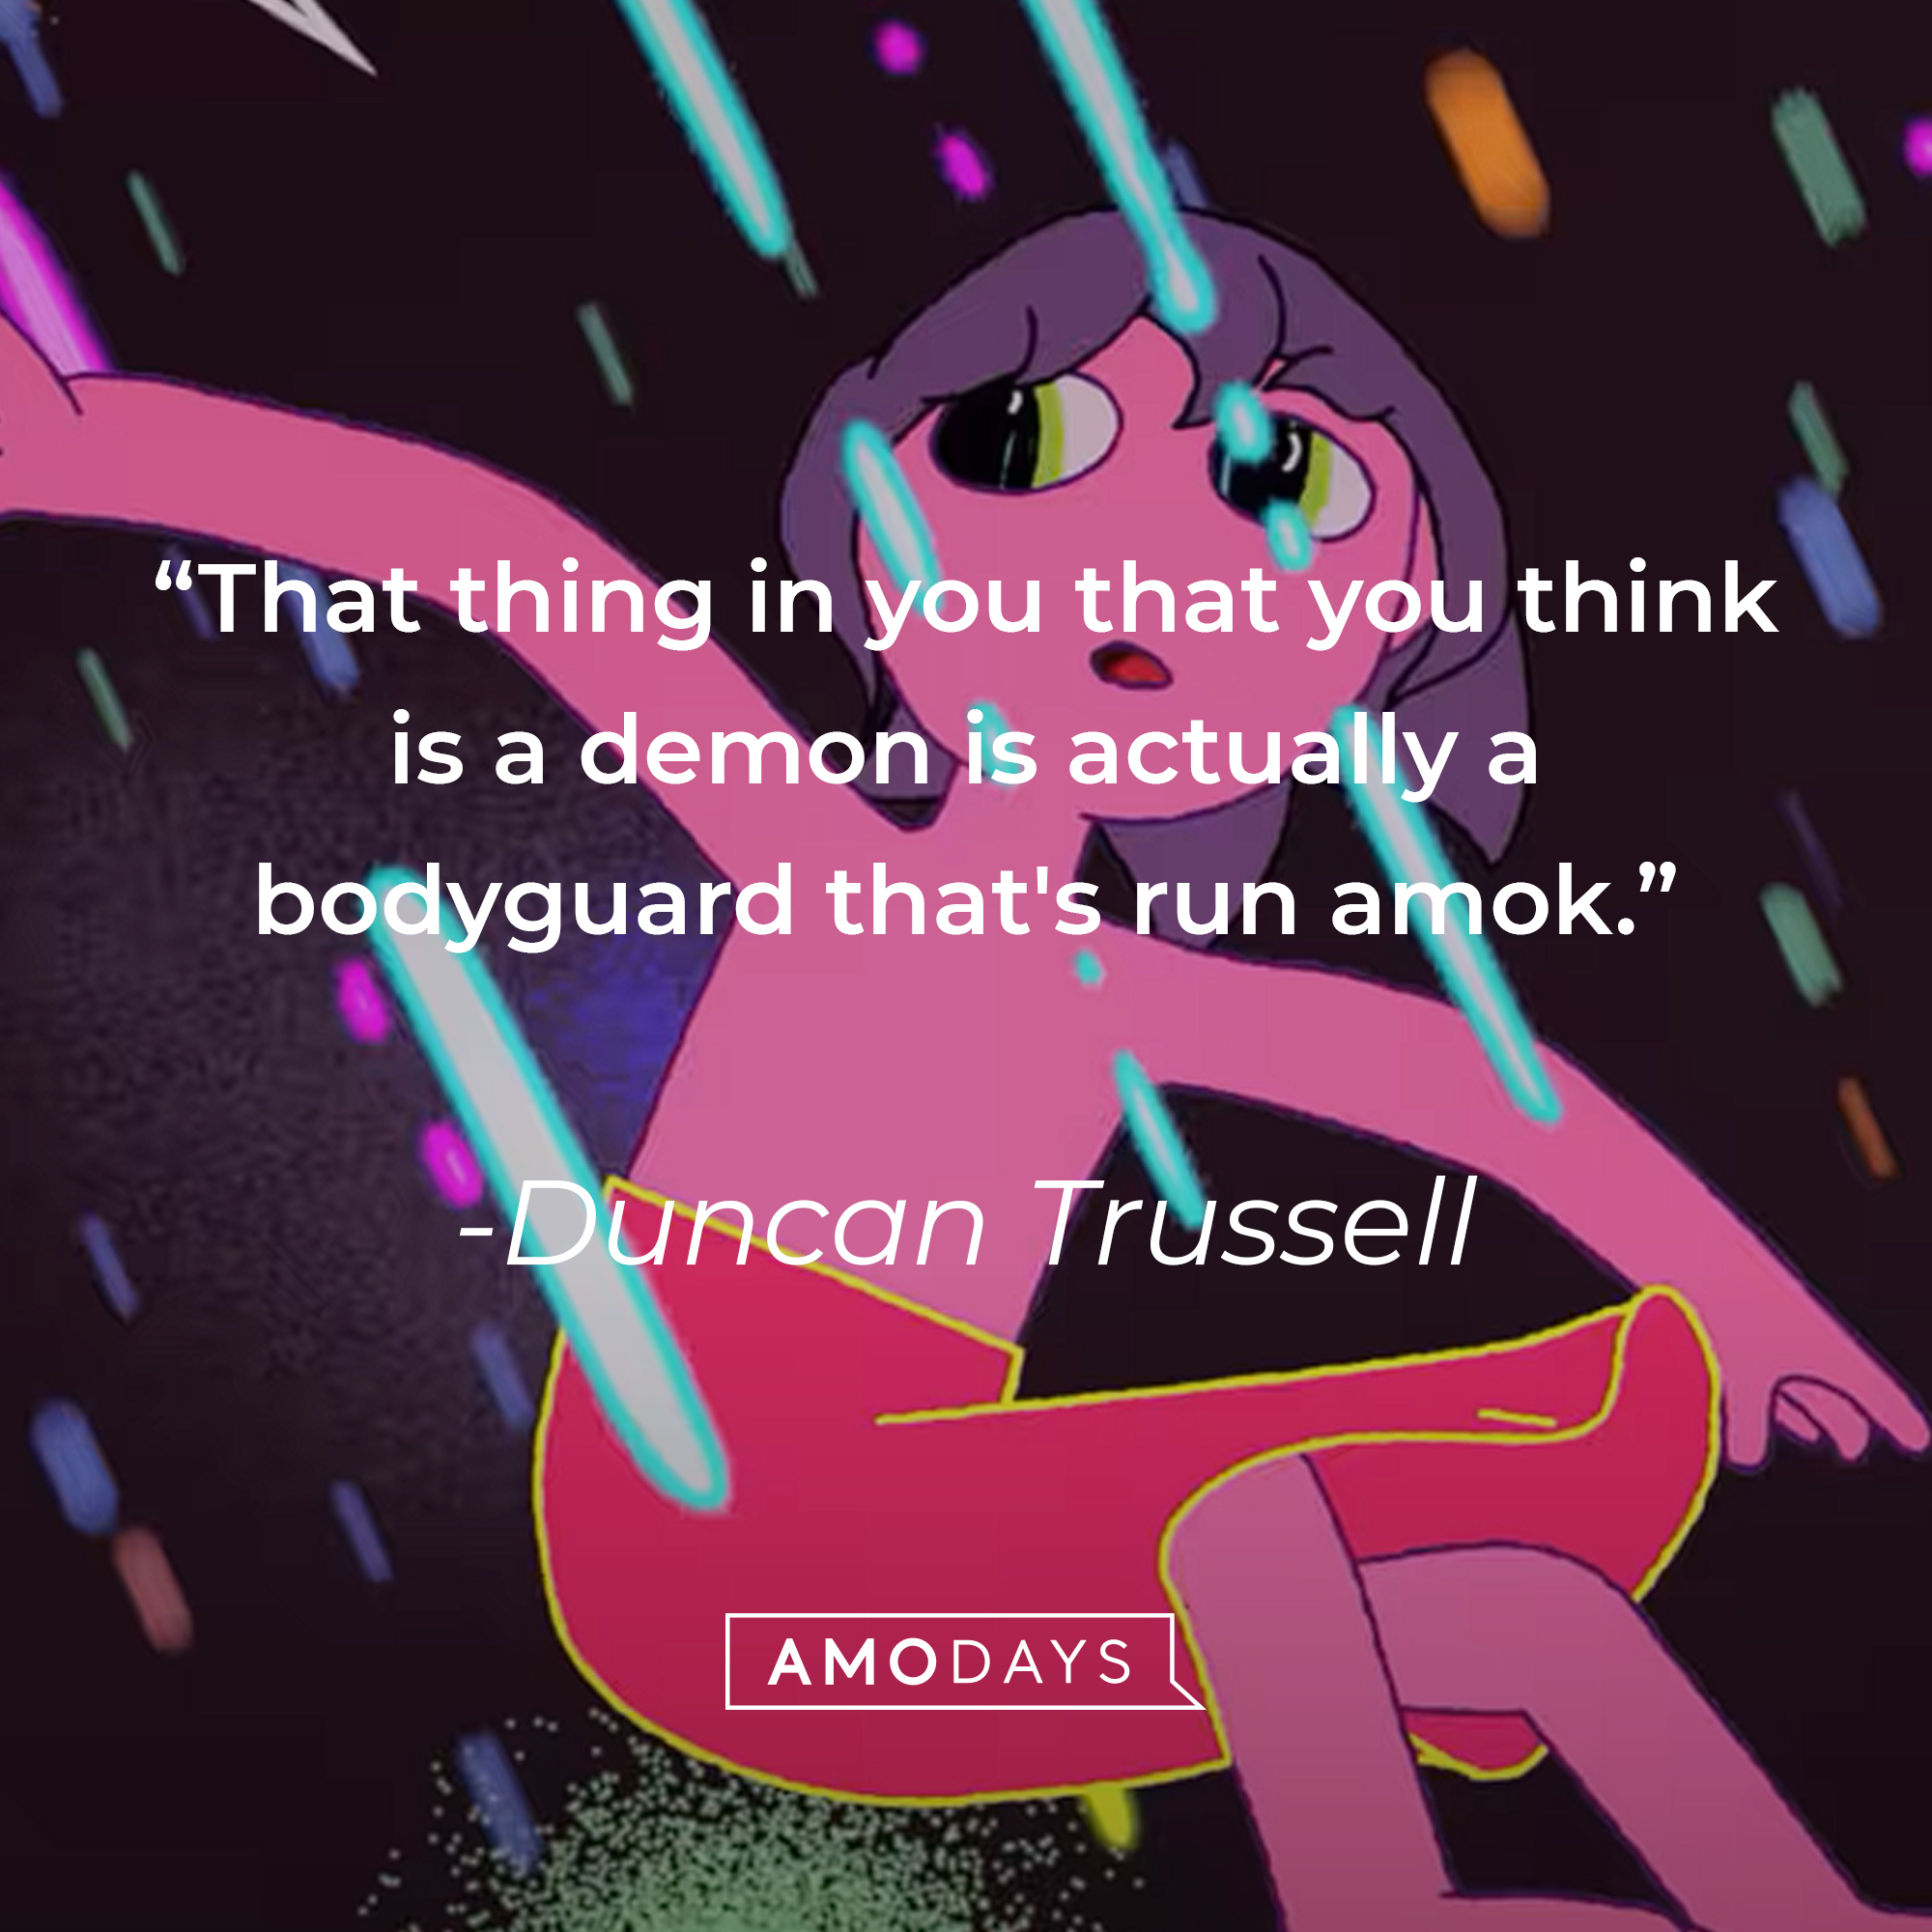 Duncan Trussell's quote: "That thing in you that you think is a demon is actually a bodyguard that's run amok." | Source: youtube.com/Netflix